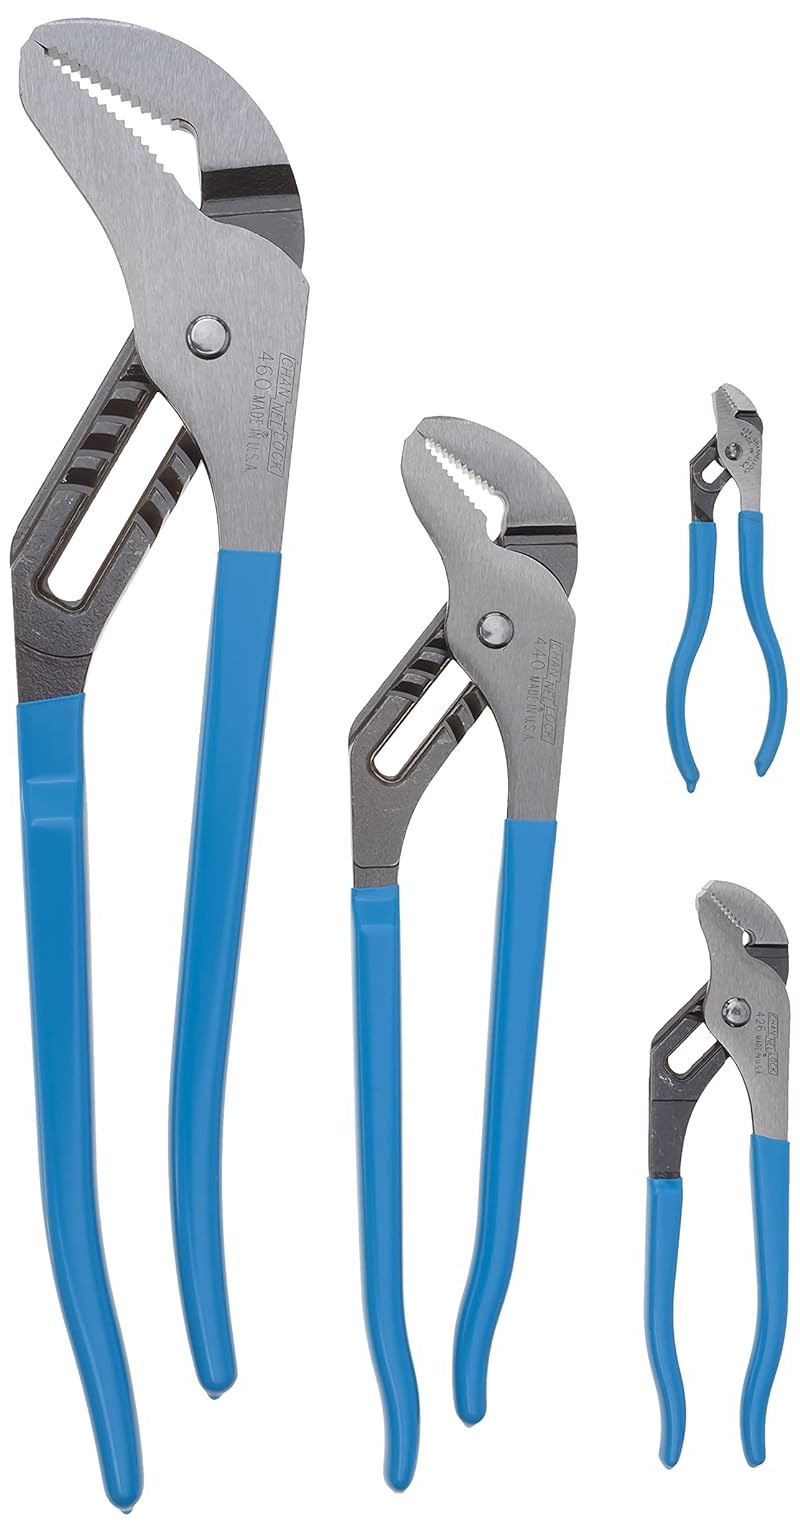 Channellock GL10 GripLock 1-3/4-Inch Jaw Capacity 9-1/2-Inch Utility Tongue  and Groove Plier, Blue, 2 Piece Set, 9.5, 12.5